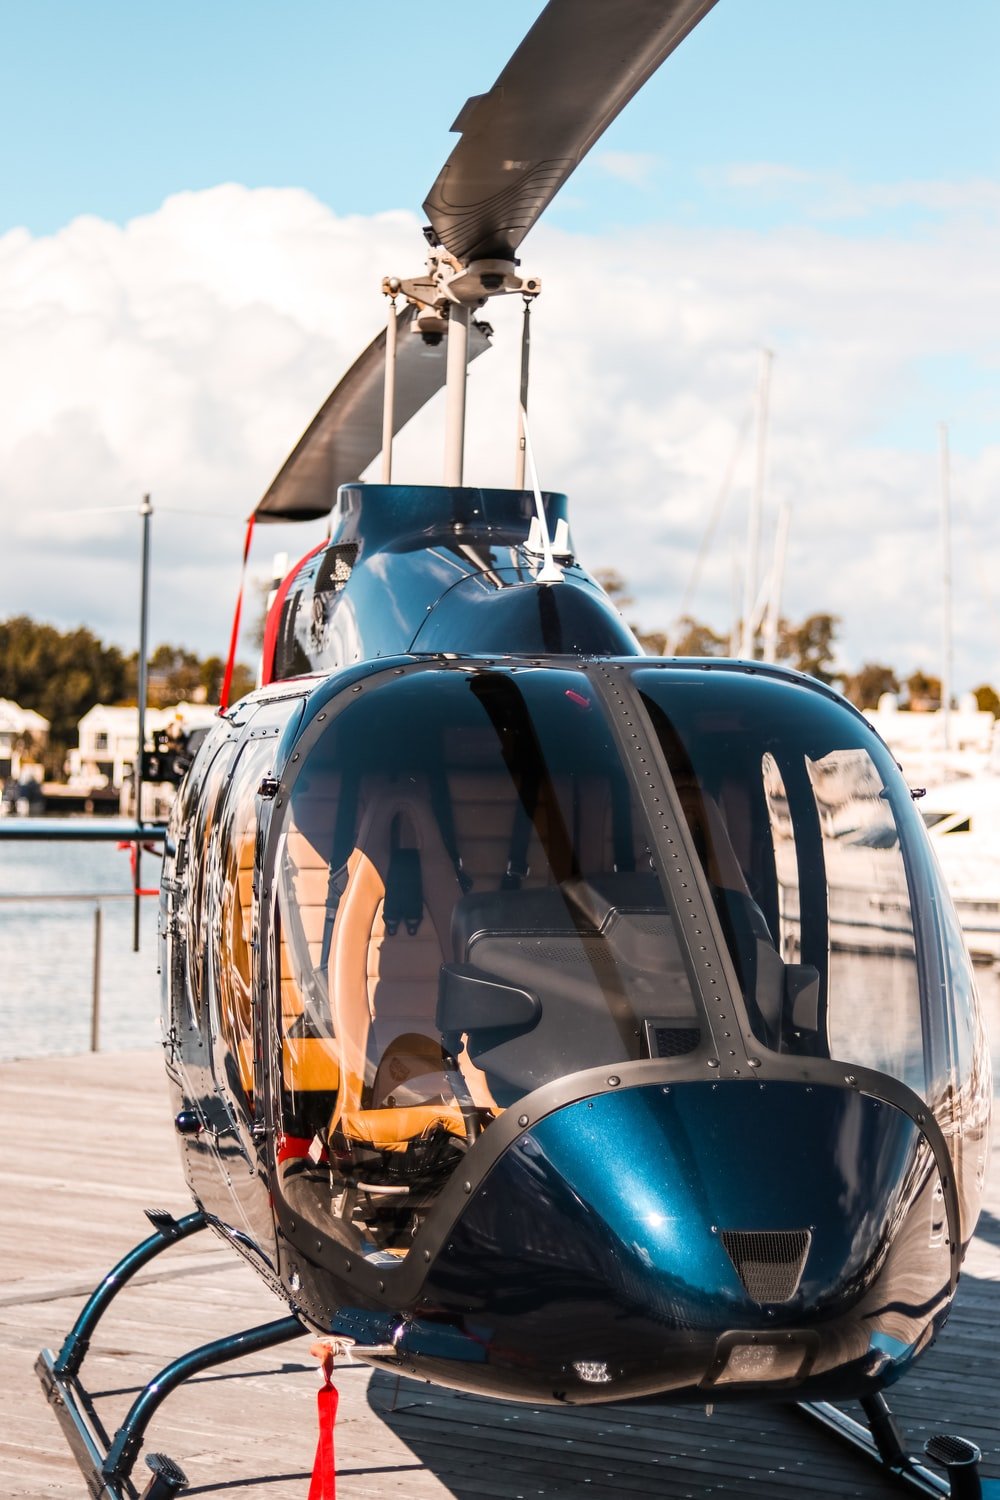 Helicopter Picture. Download Free Image